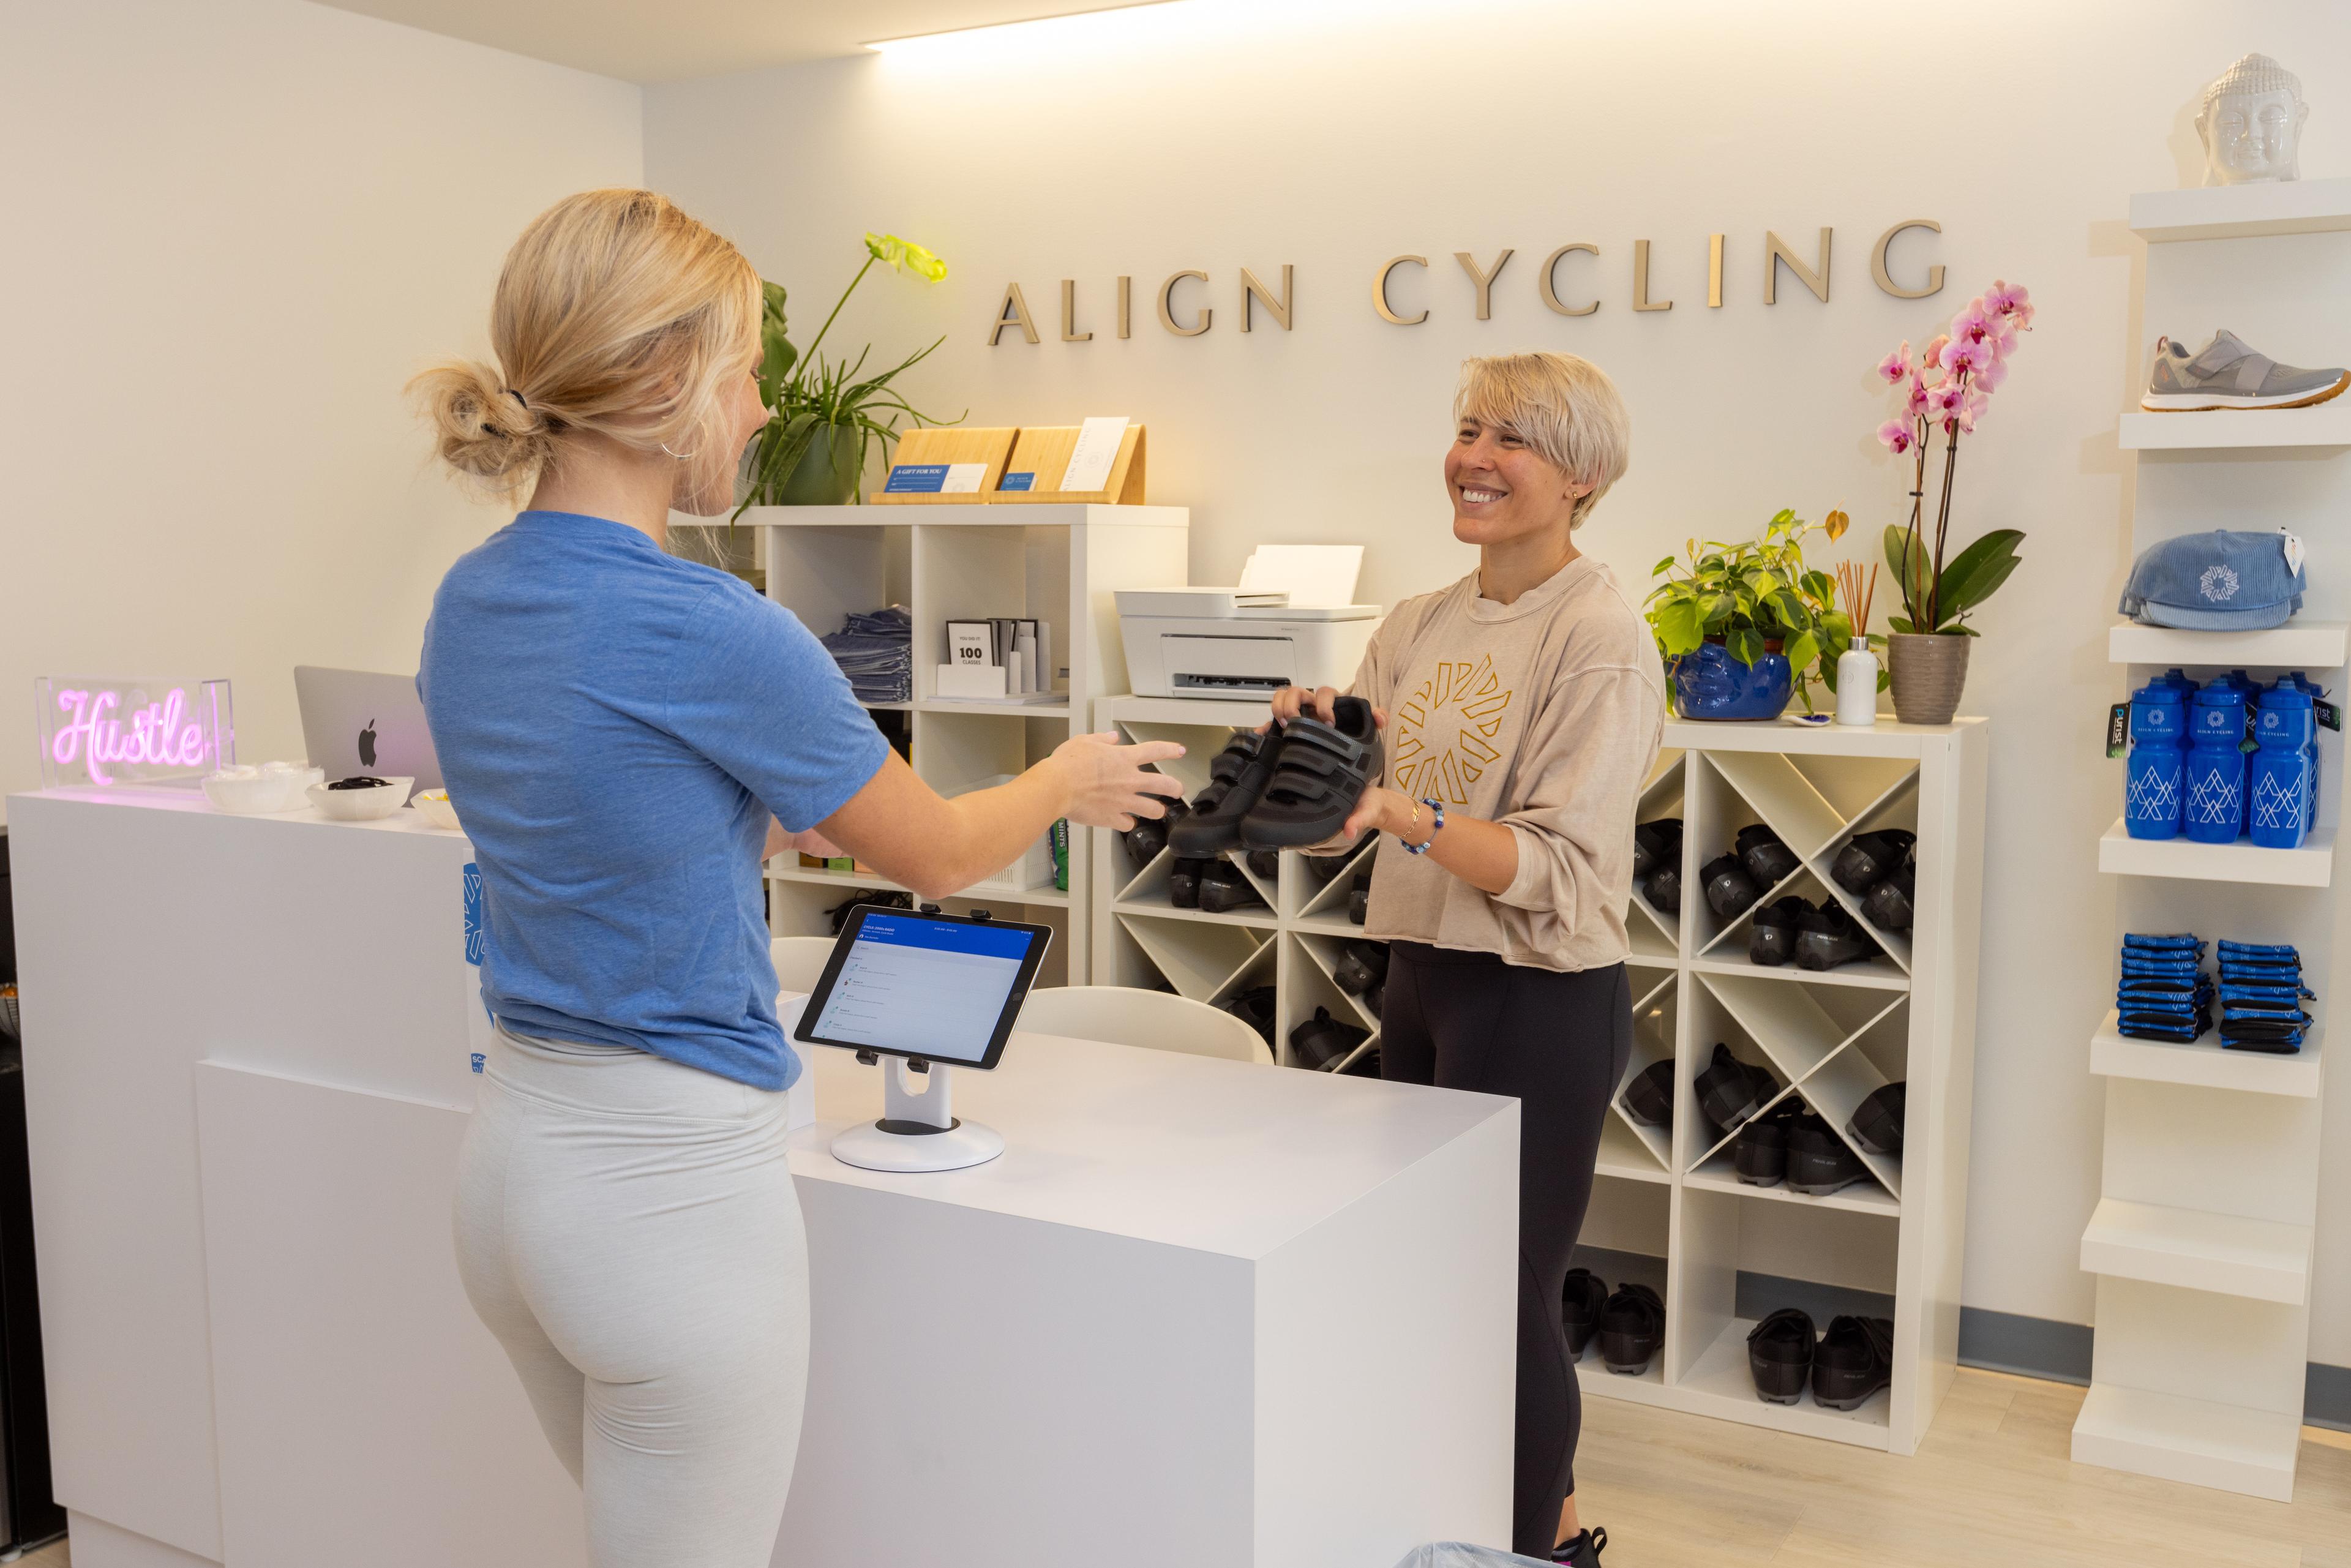 check in and rental cycle shoes